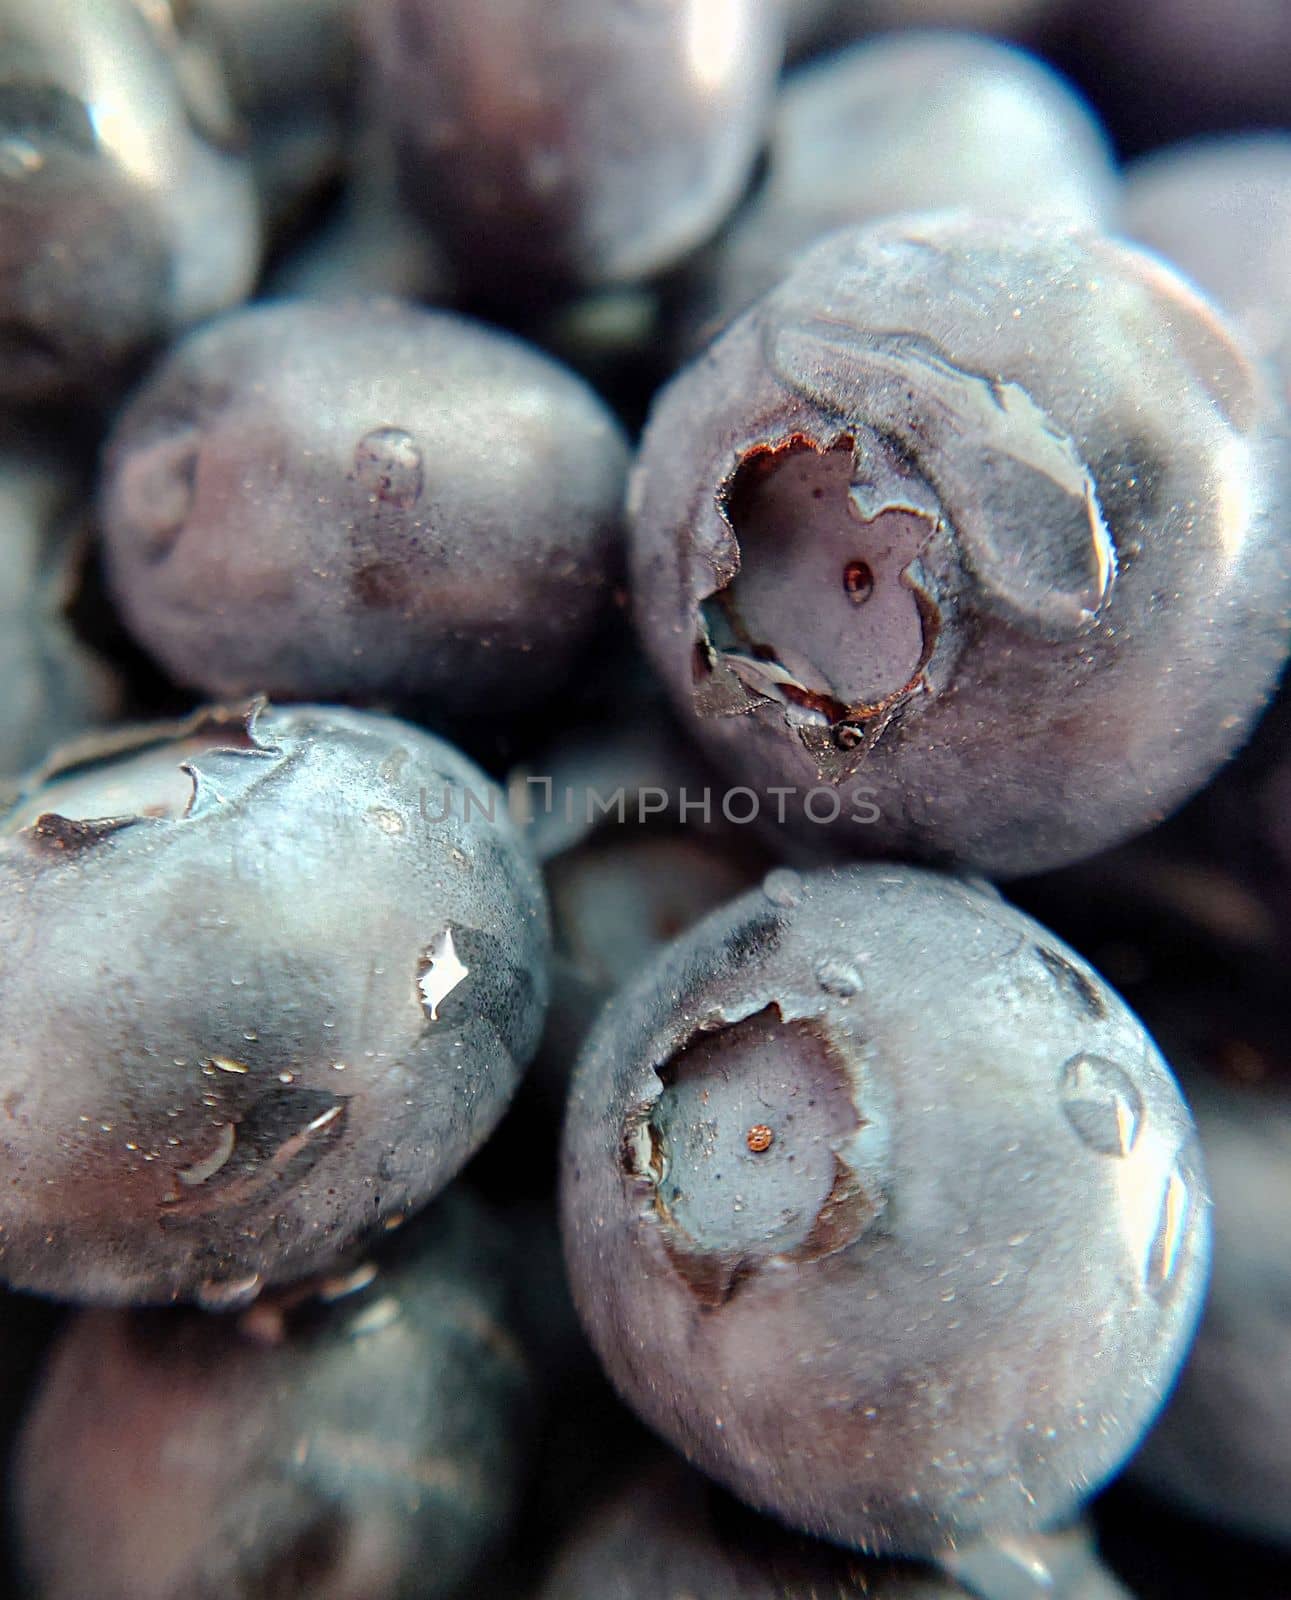 Garden ripe large blueberries with a drop of water close-up.Macro photography.Texture or background.Selective focus.